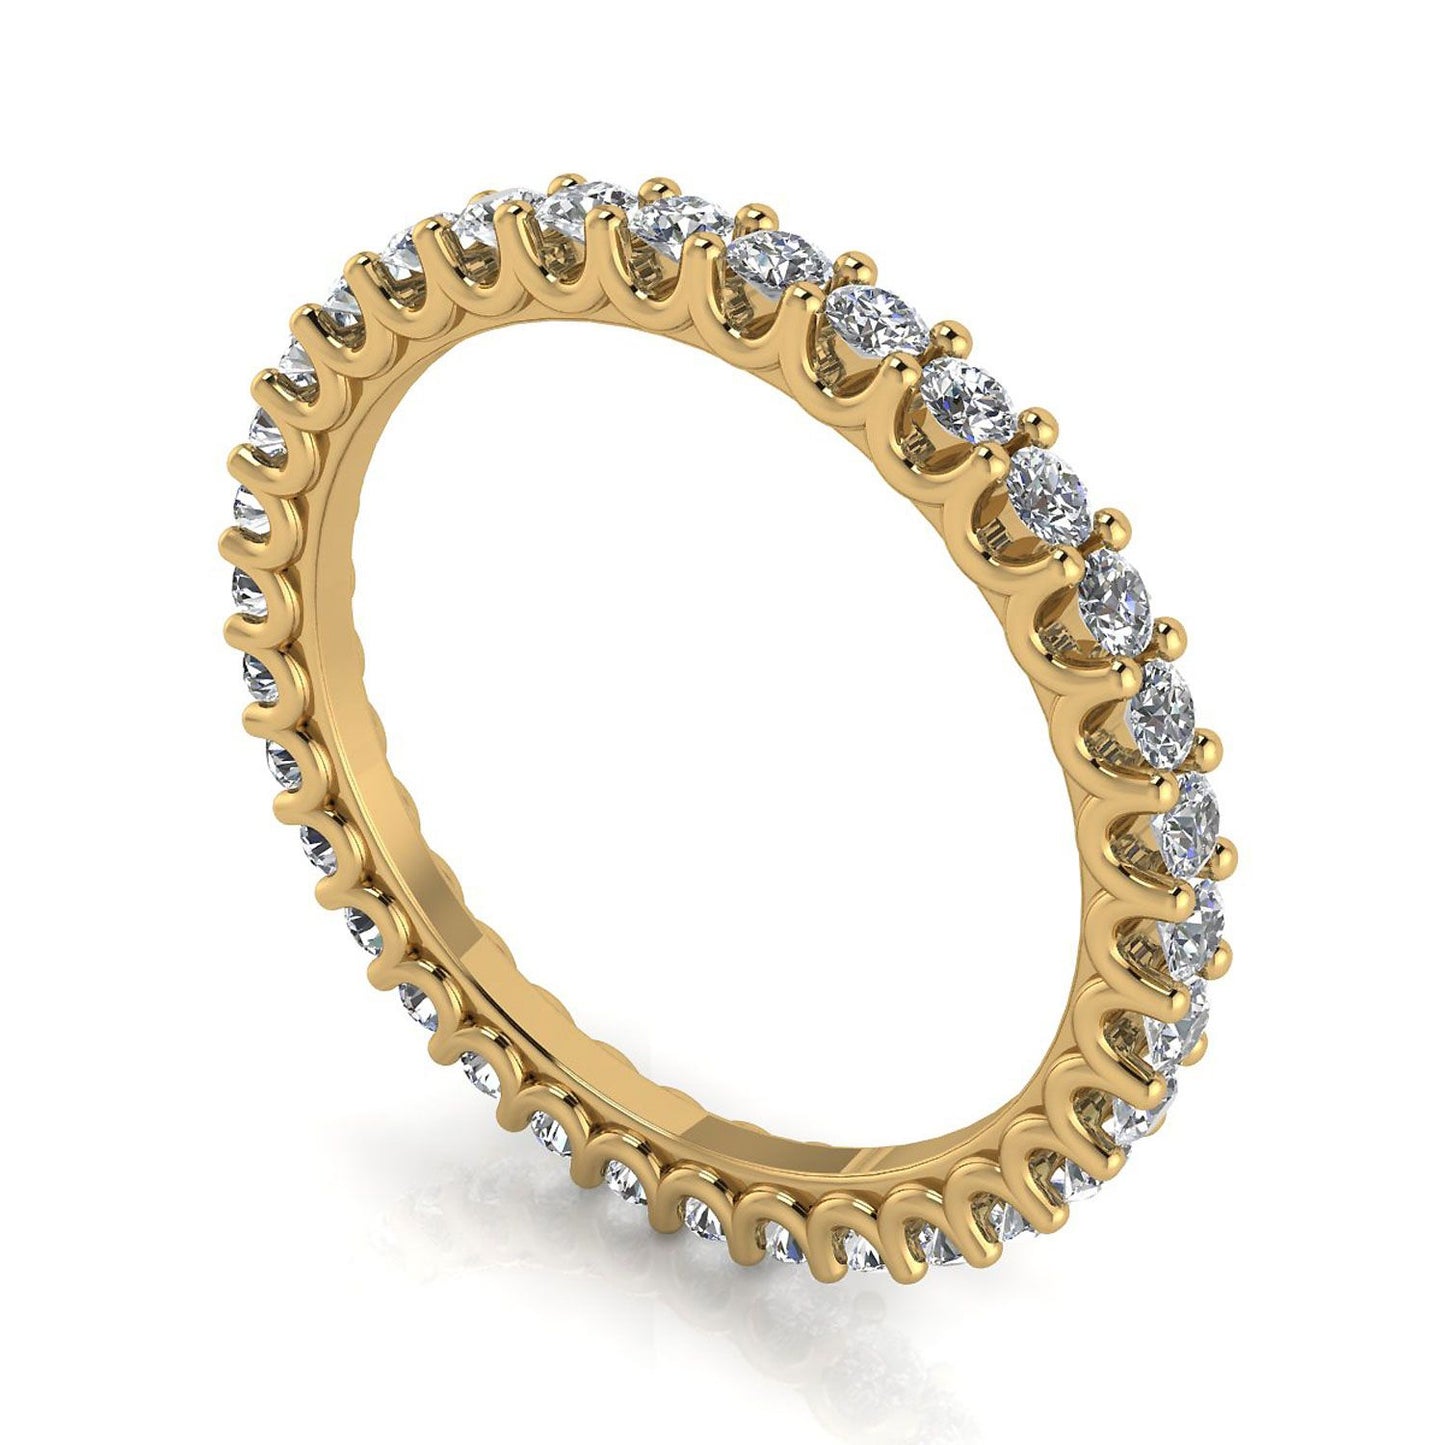 Round Brilliant Cut Diamond Shared Prong Set Eternity Ring In 14k Yellow Gold  (0.46ct. Tw.) Ring Size 5.5